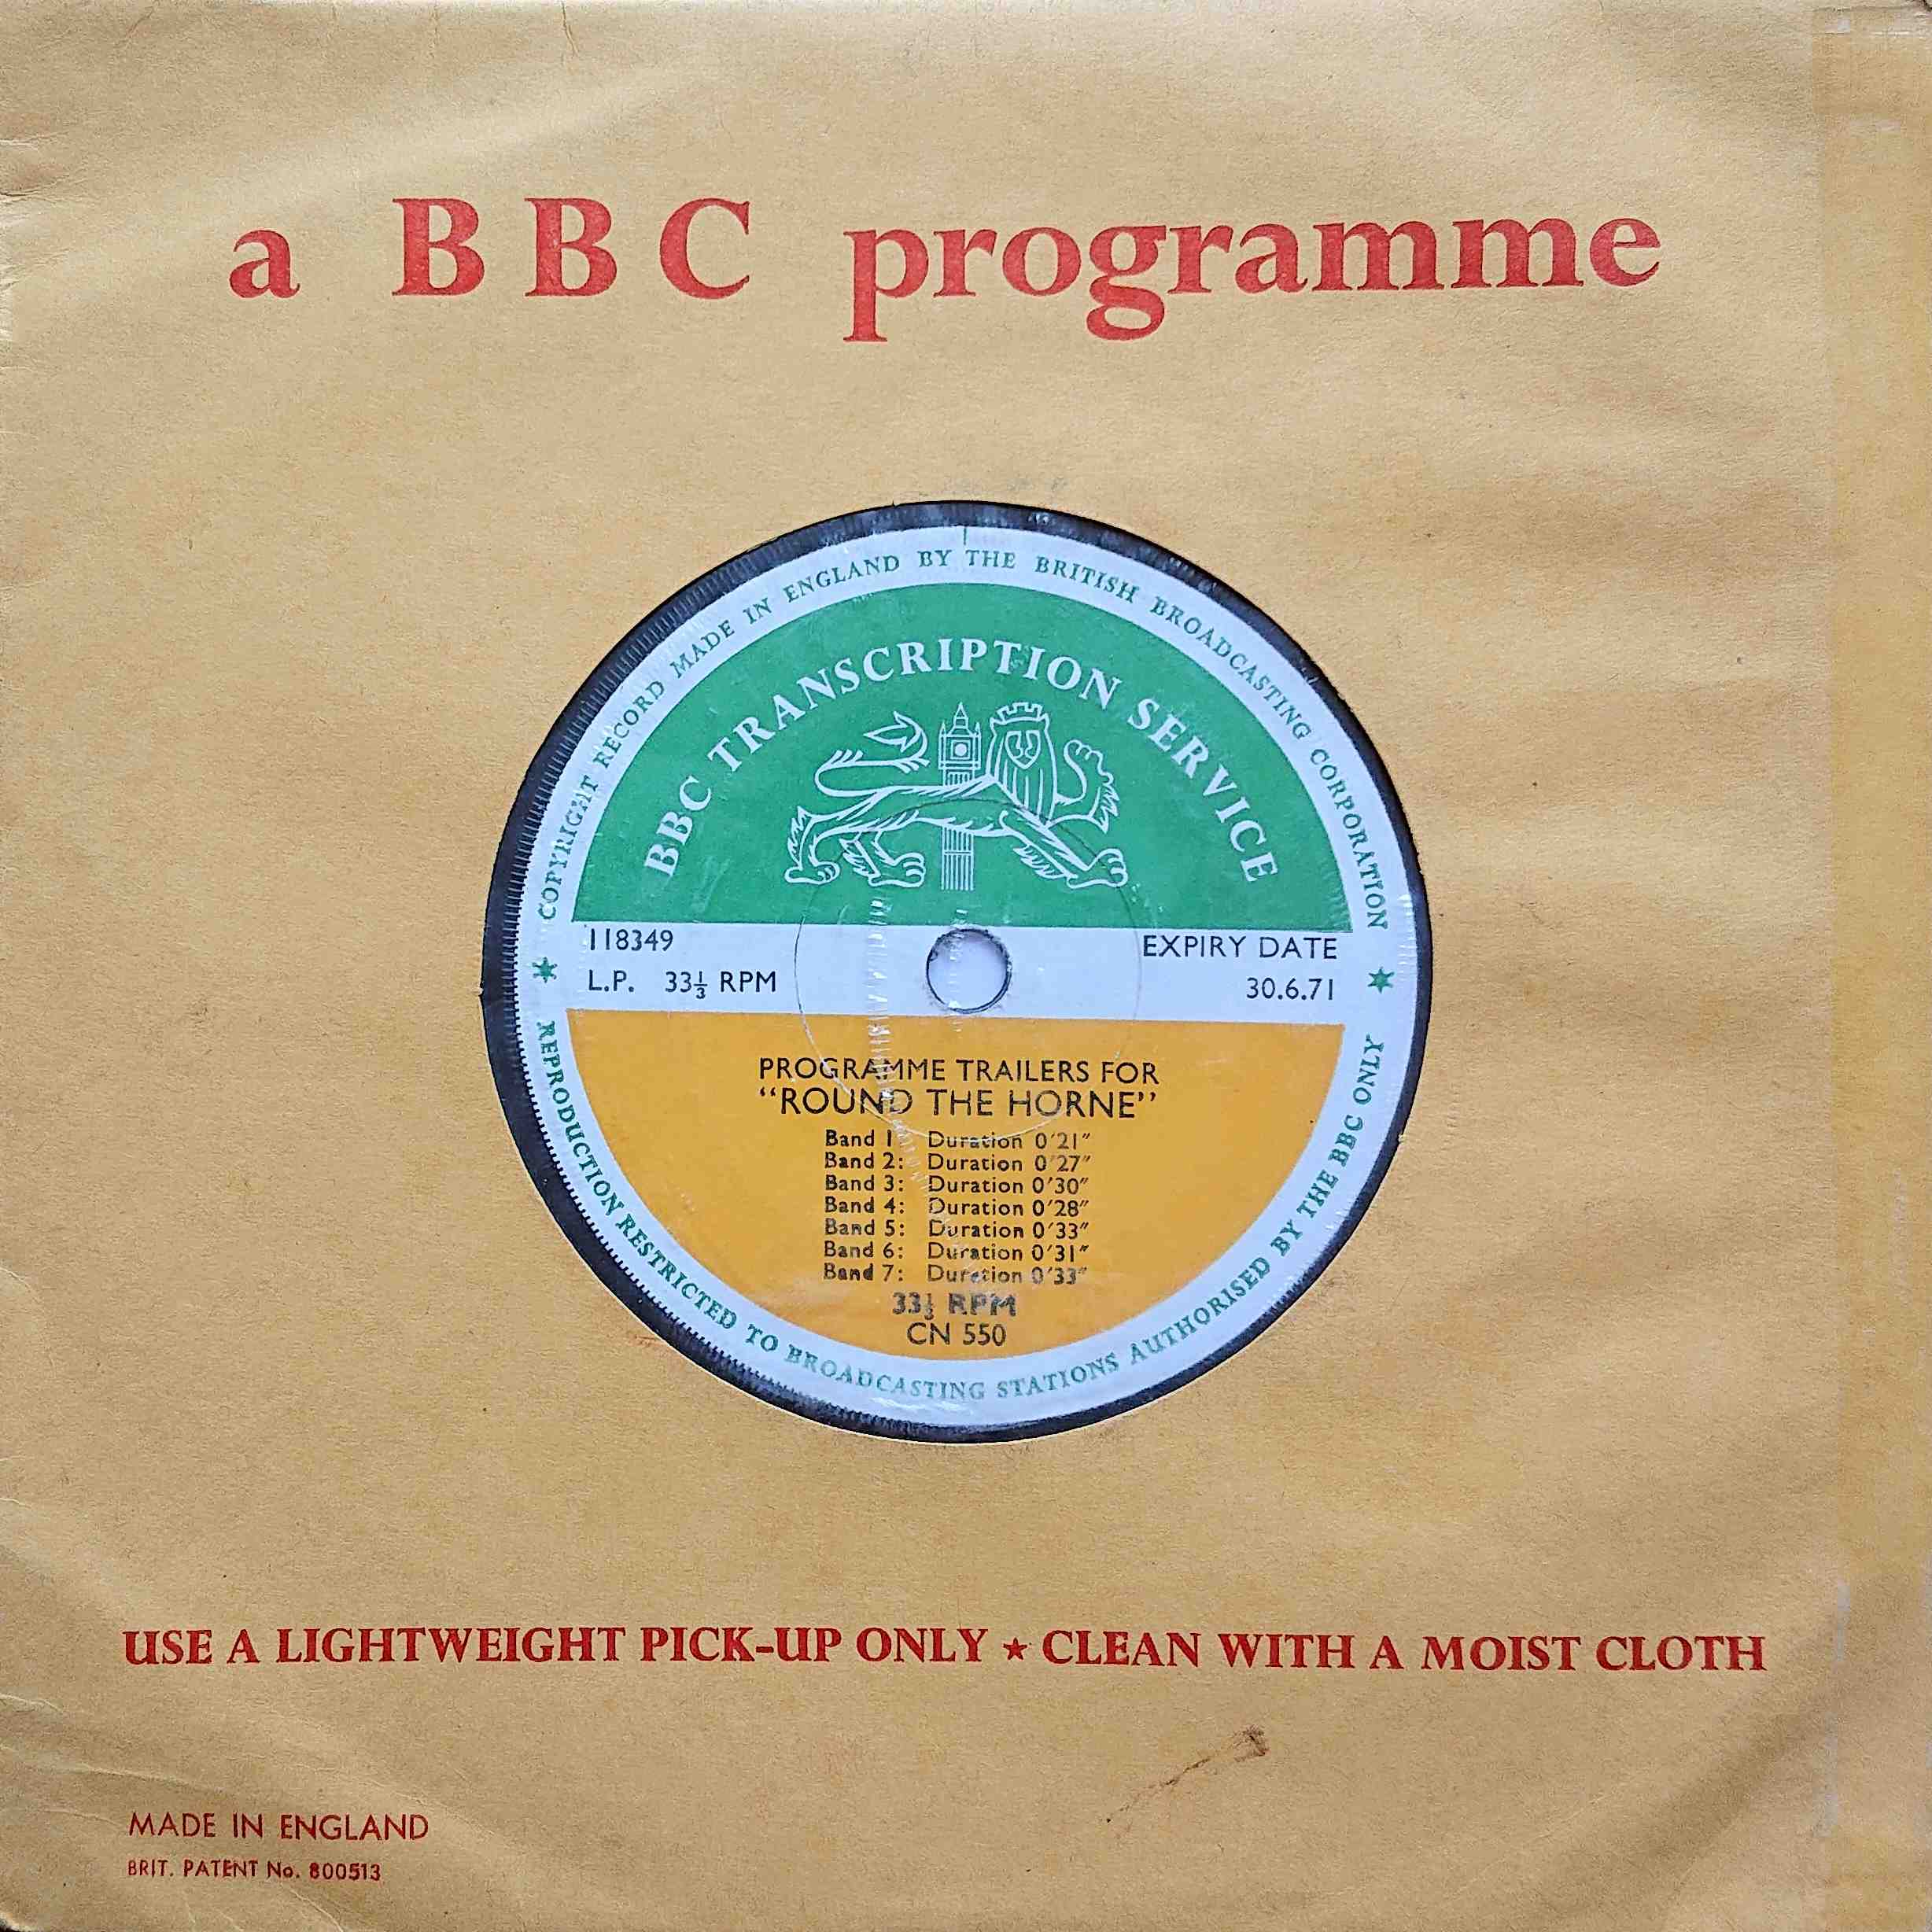 Picture of Programme trailers for "Round the Horne" by artist Kenneth Horne from the BBC singles - Records and Tapes library